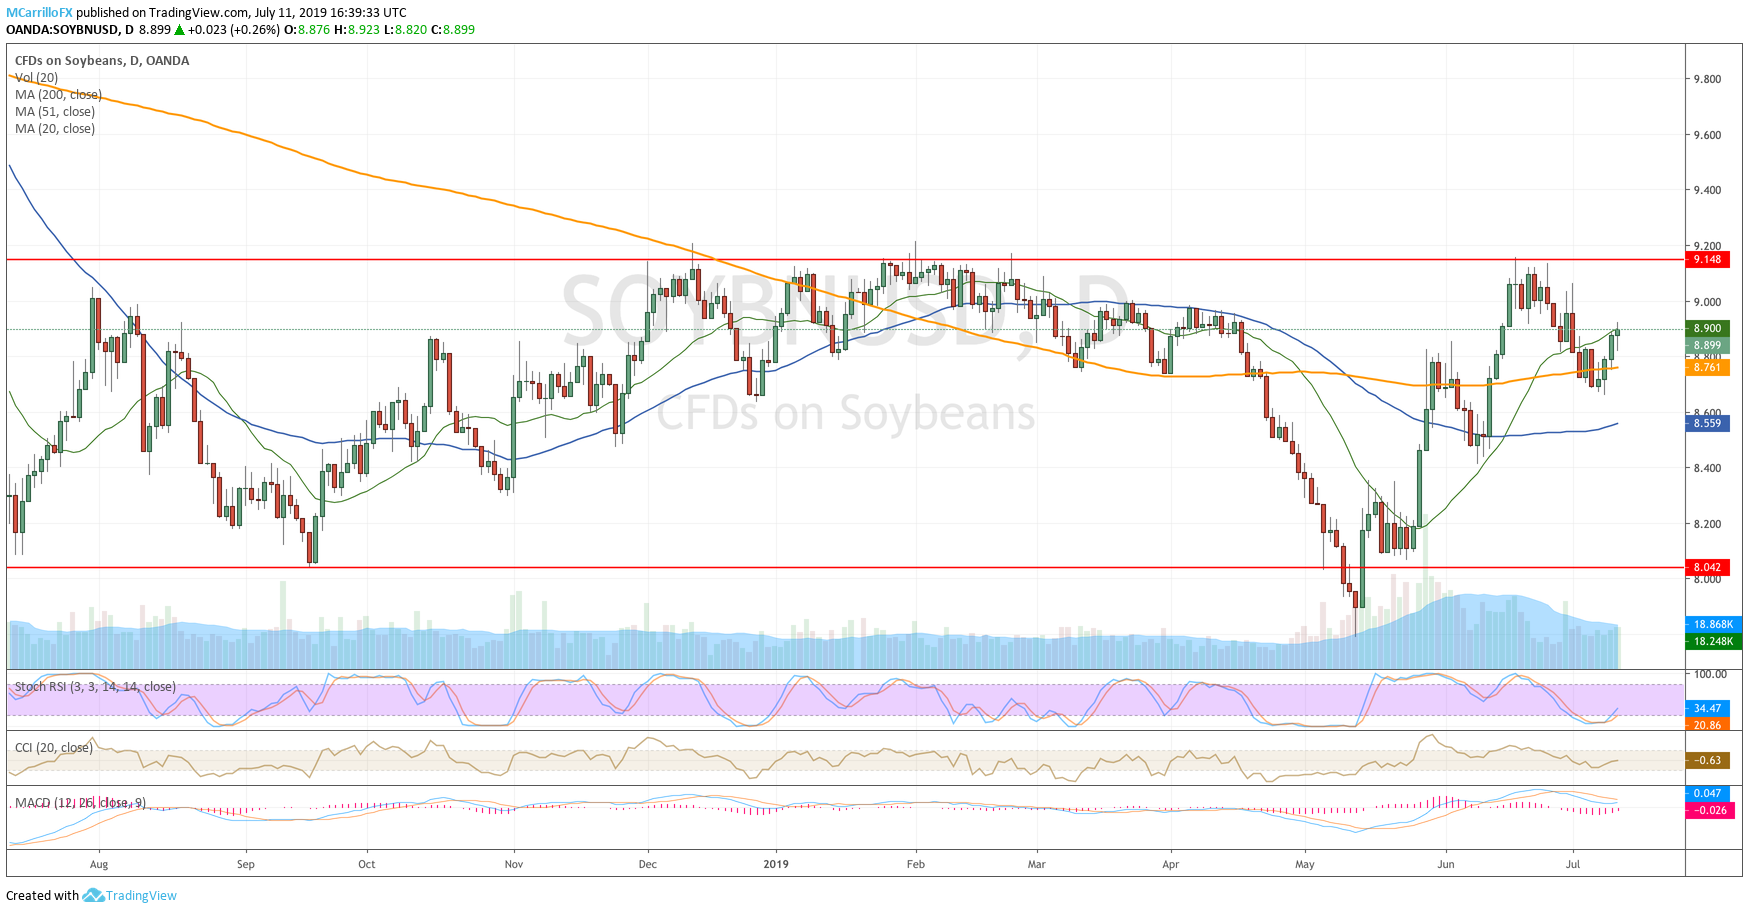 Soybeans daily chart July 11